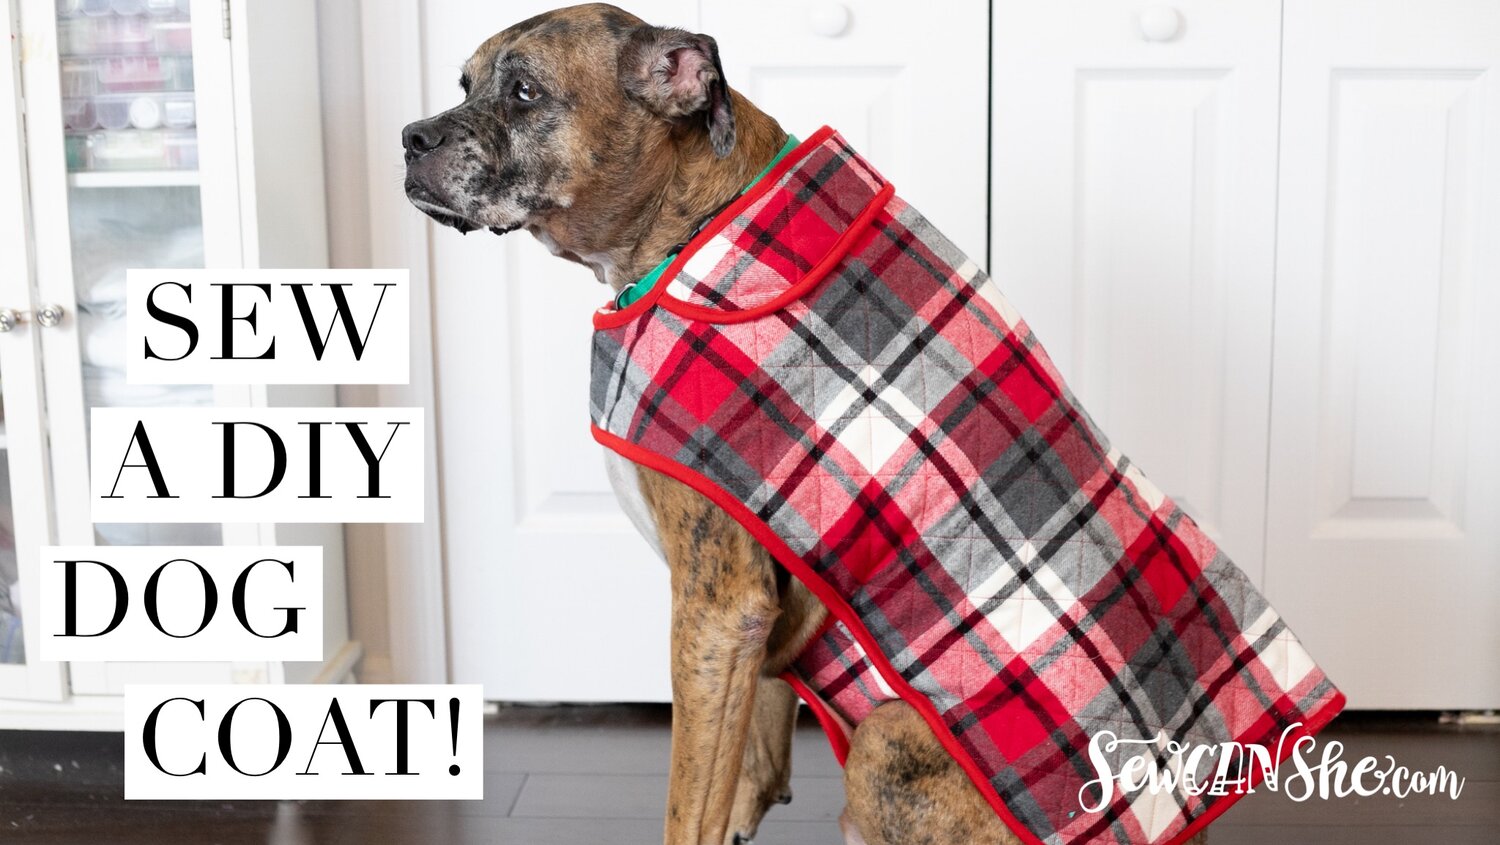 Diy Fur Baby Coat How To Sew A Dog Coat Sewcanshe Free Sewing Patterns For Beginners